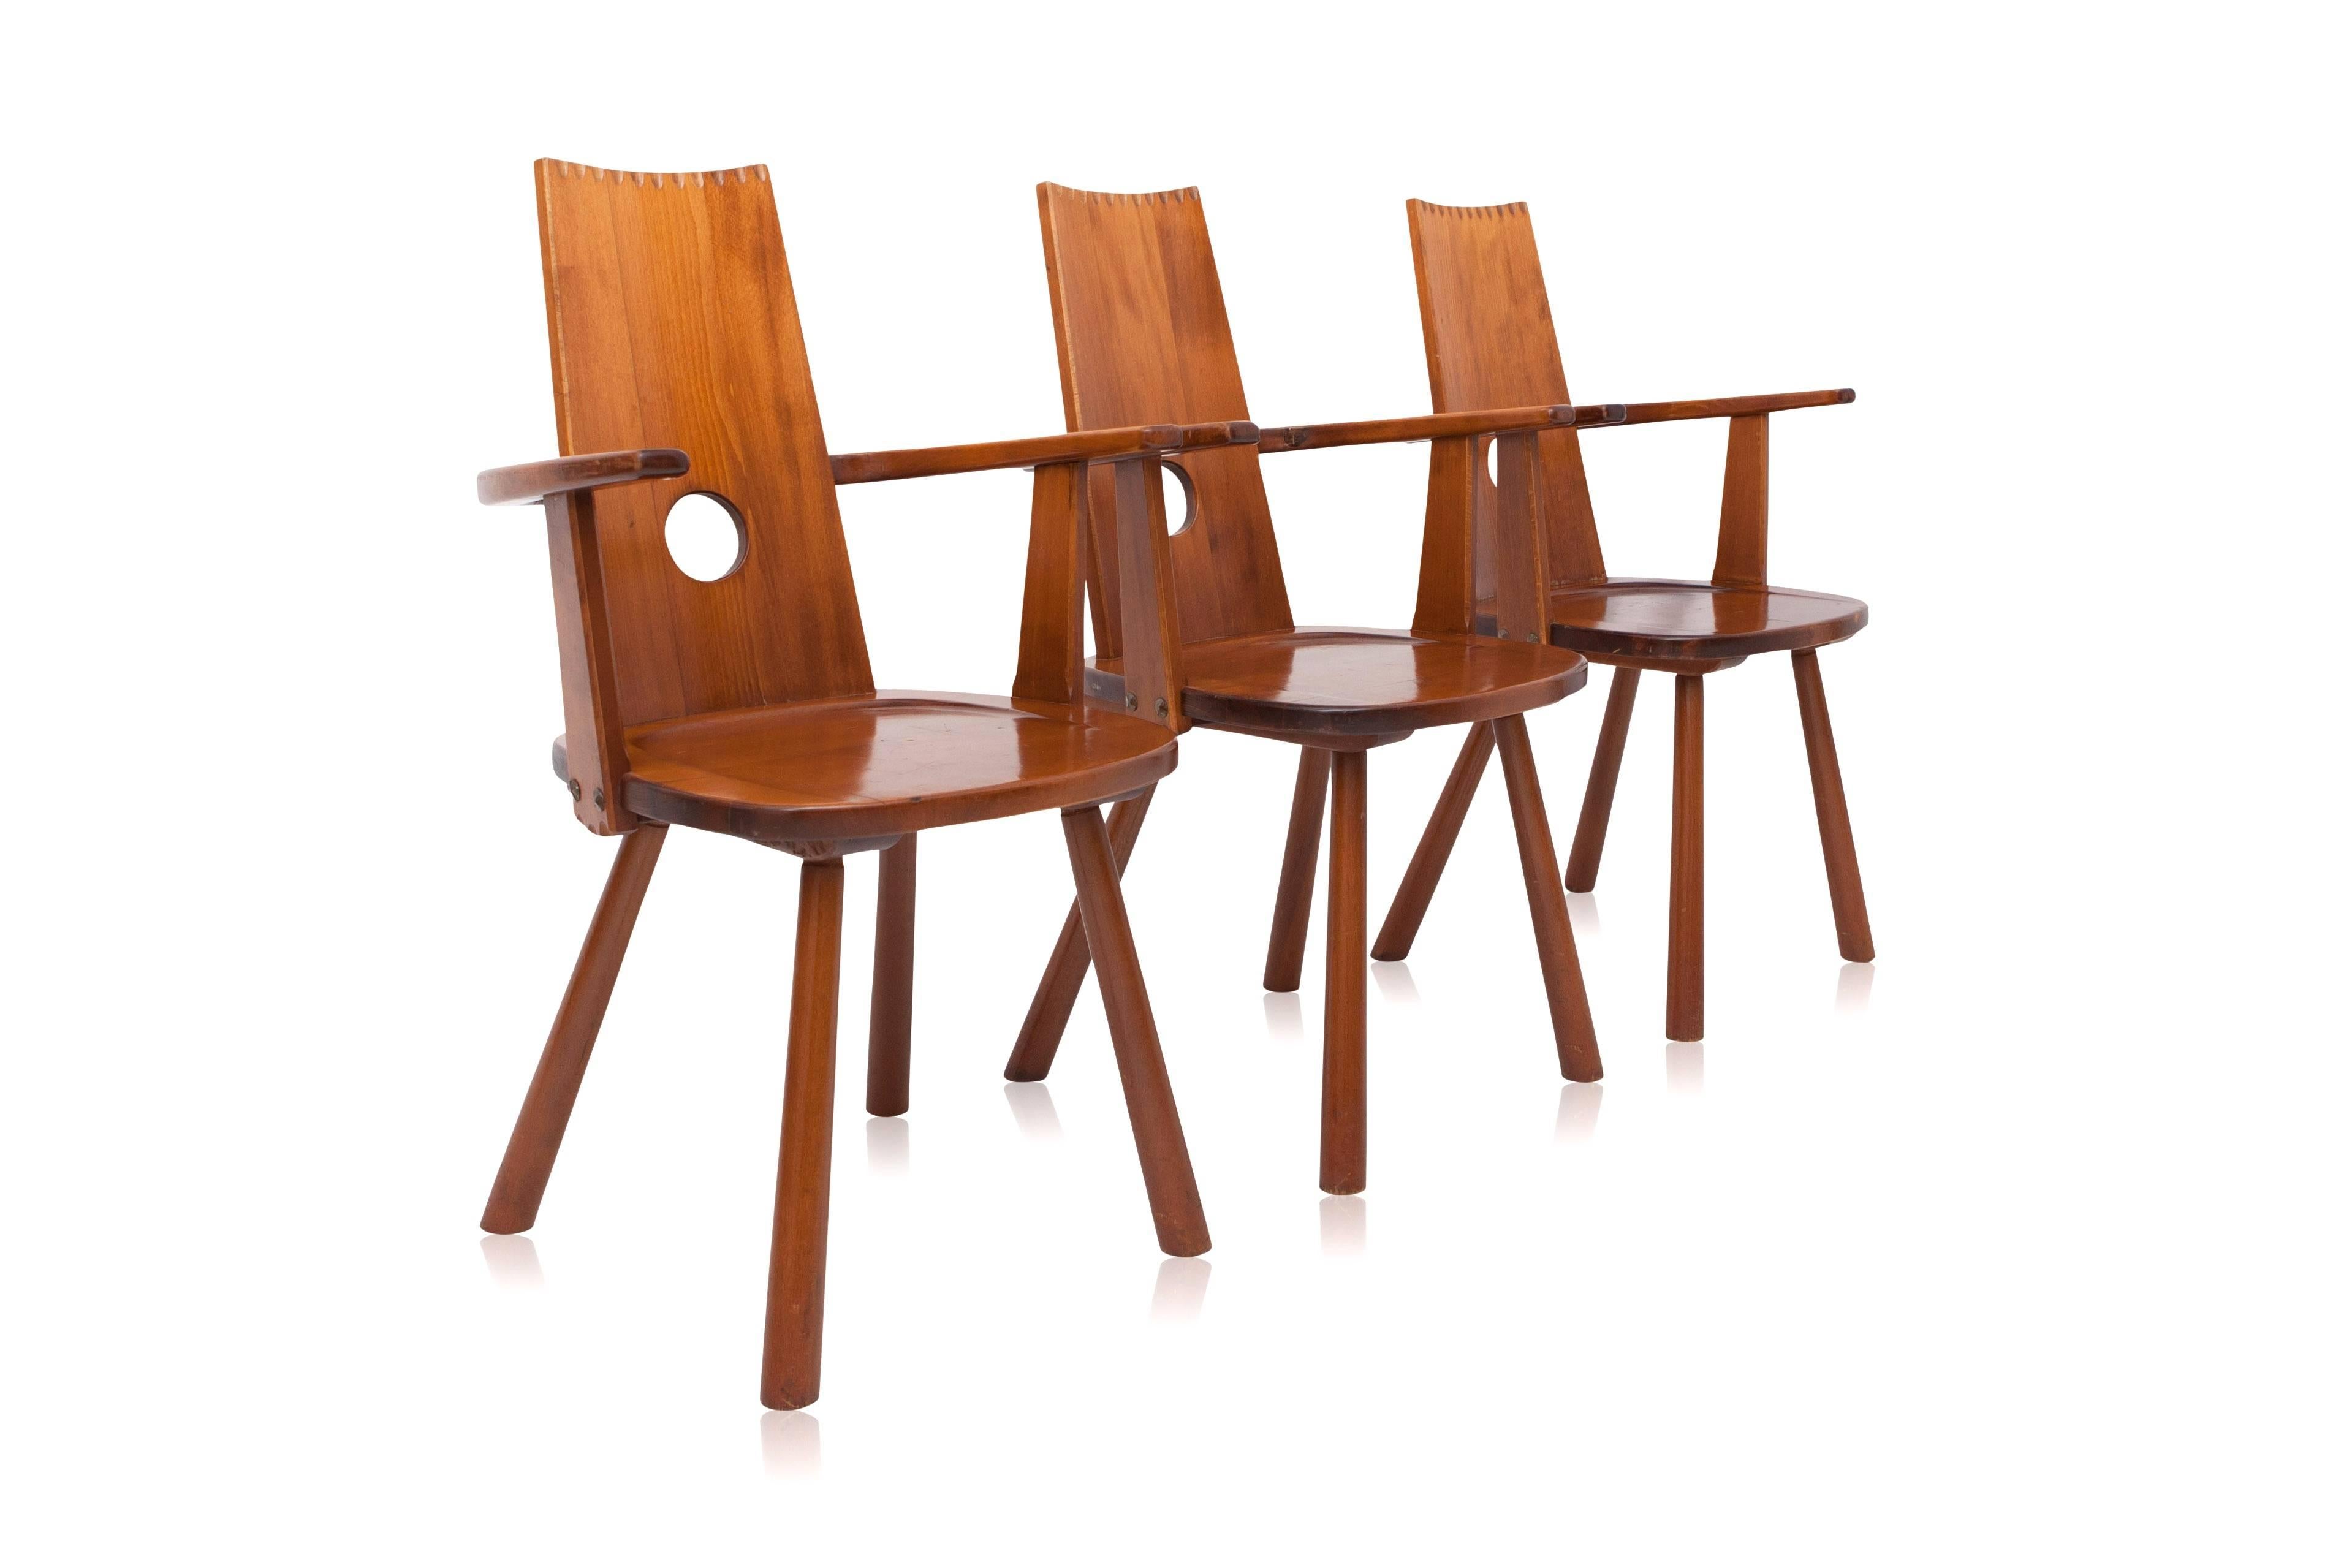 Varnished French Mid-Century Modern Dining Chairs, set of six